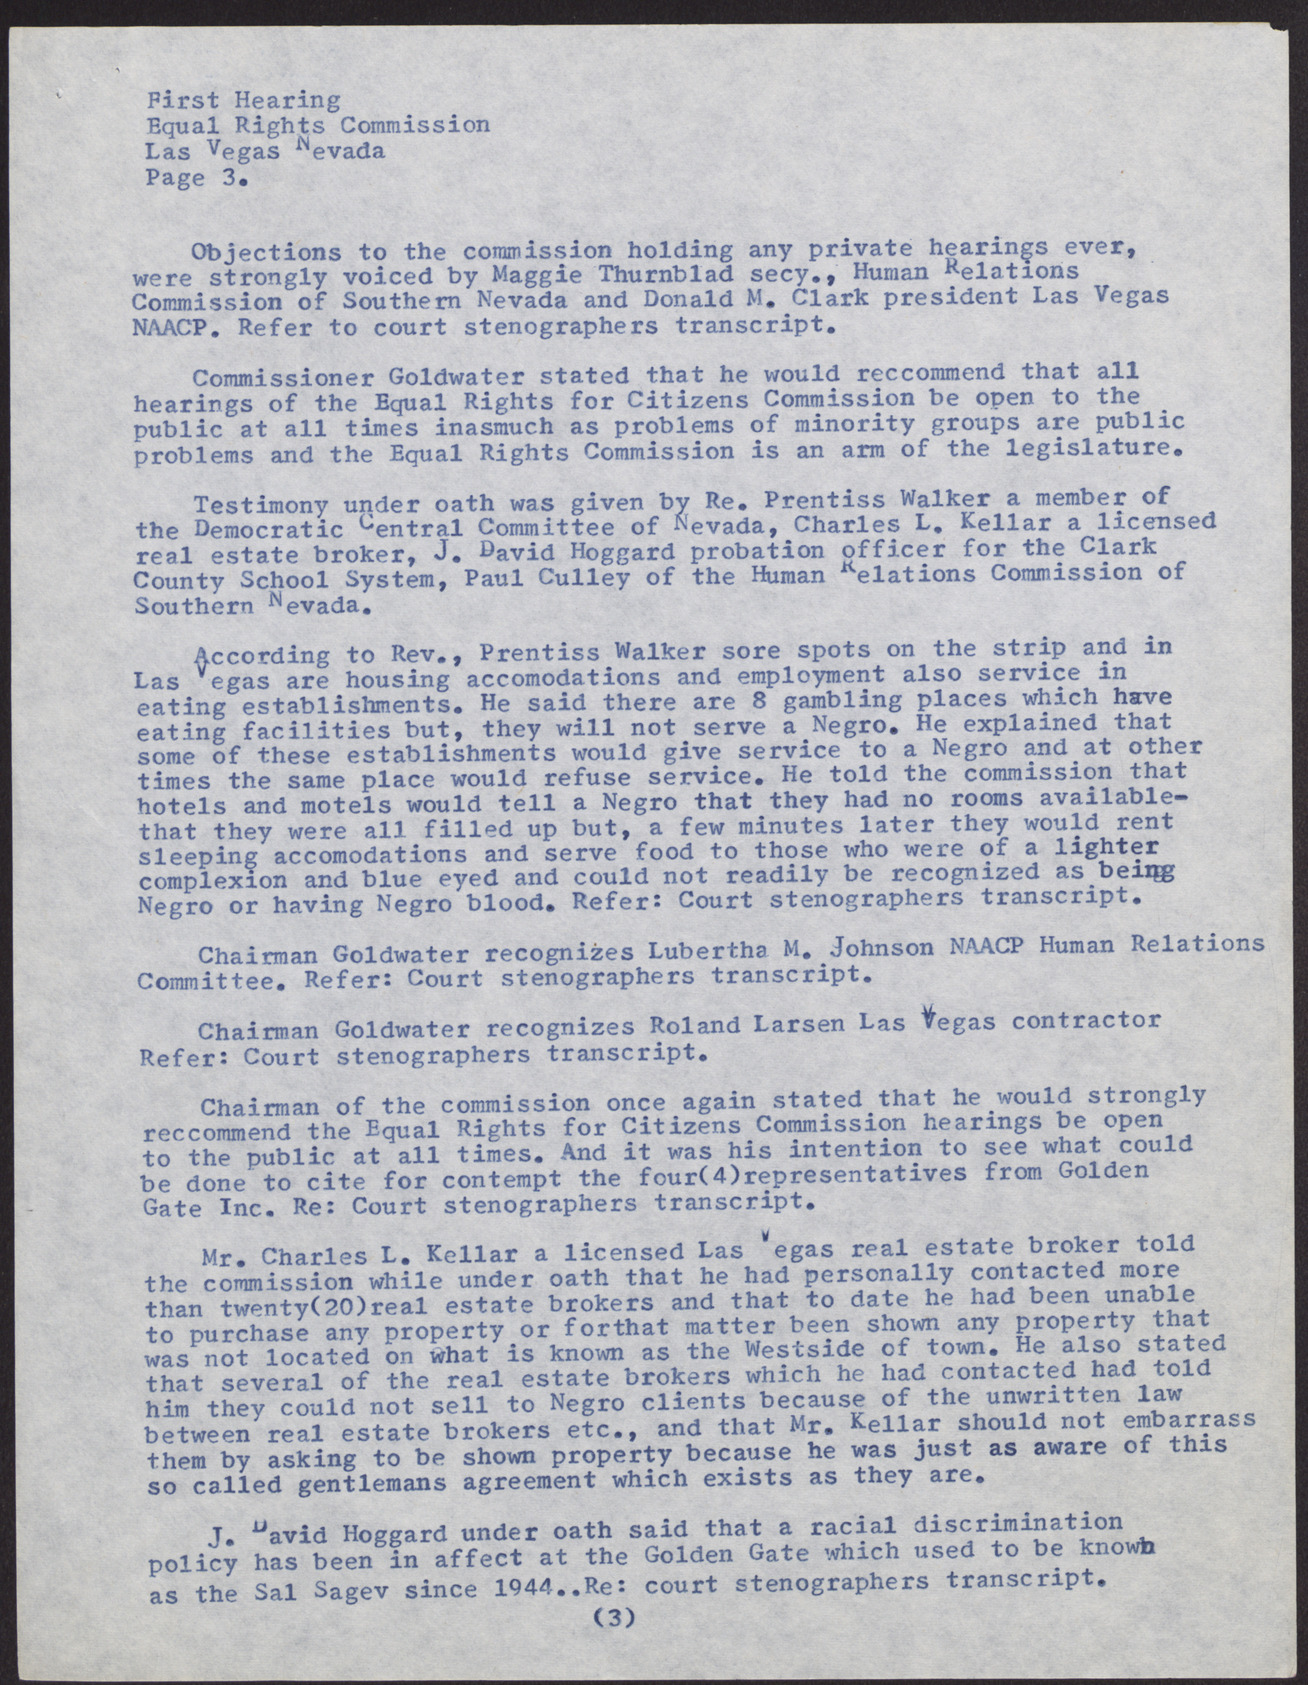 Minutes for the State of Nevada Equal Rights Commission First Hearing (5 pages), July 15, 1961, page 3